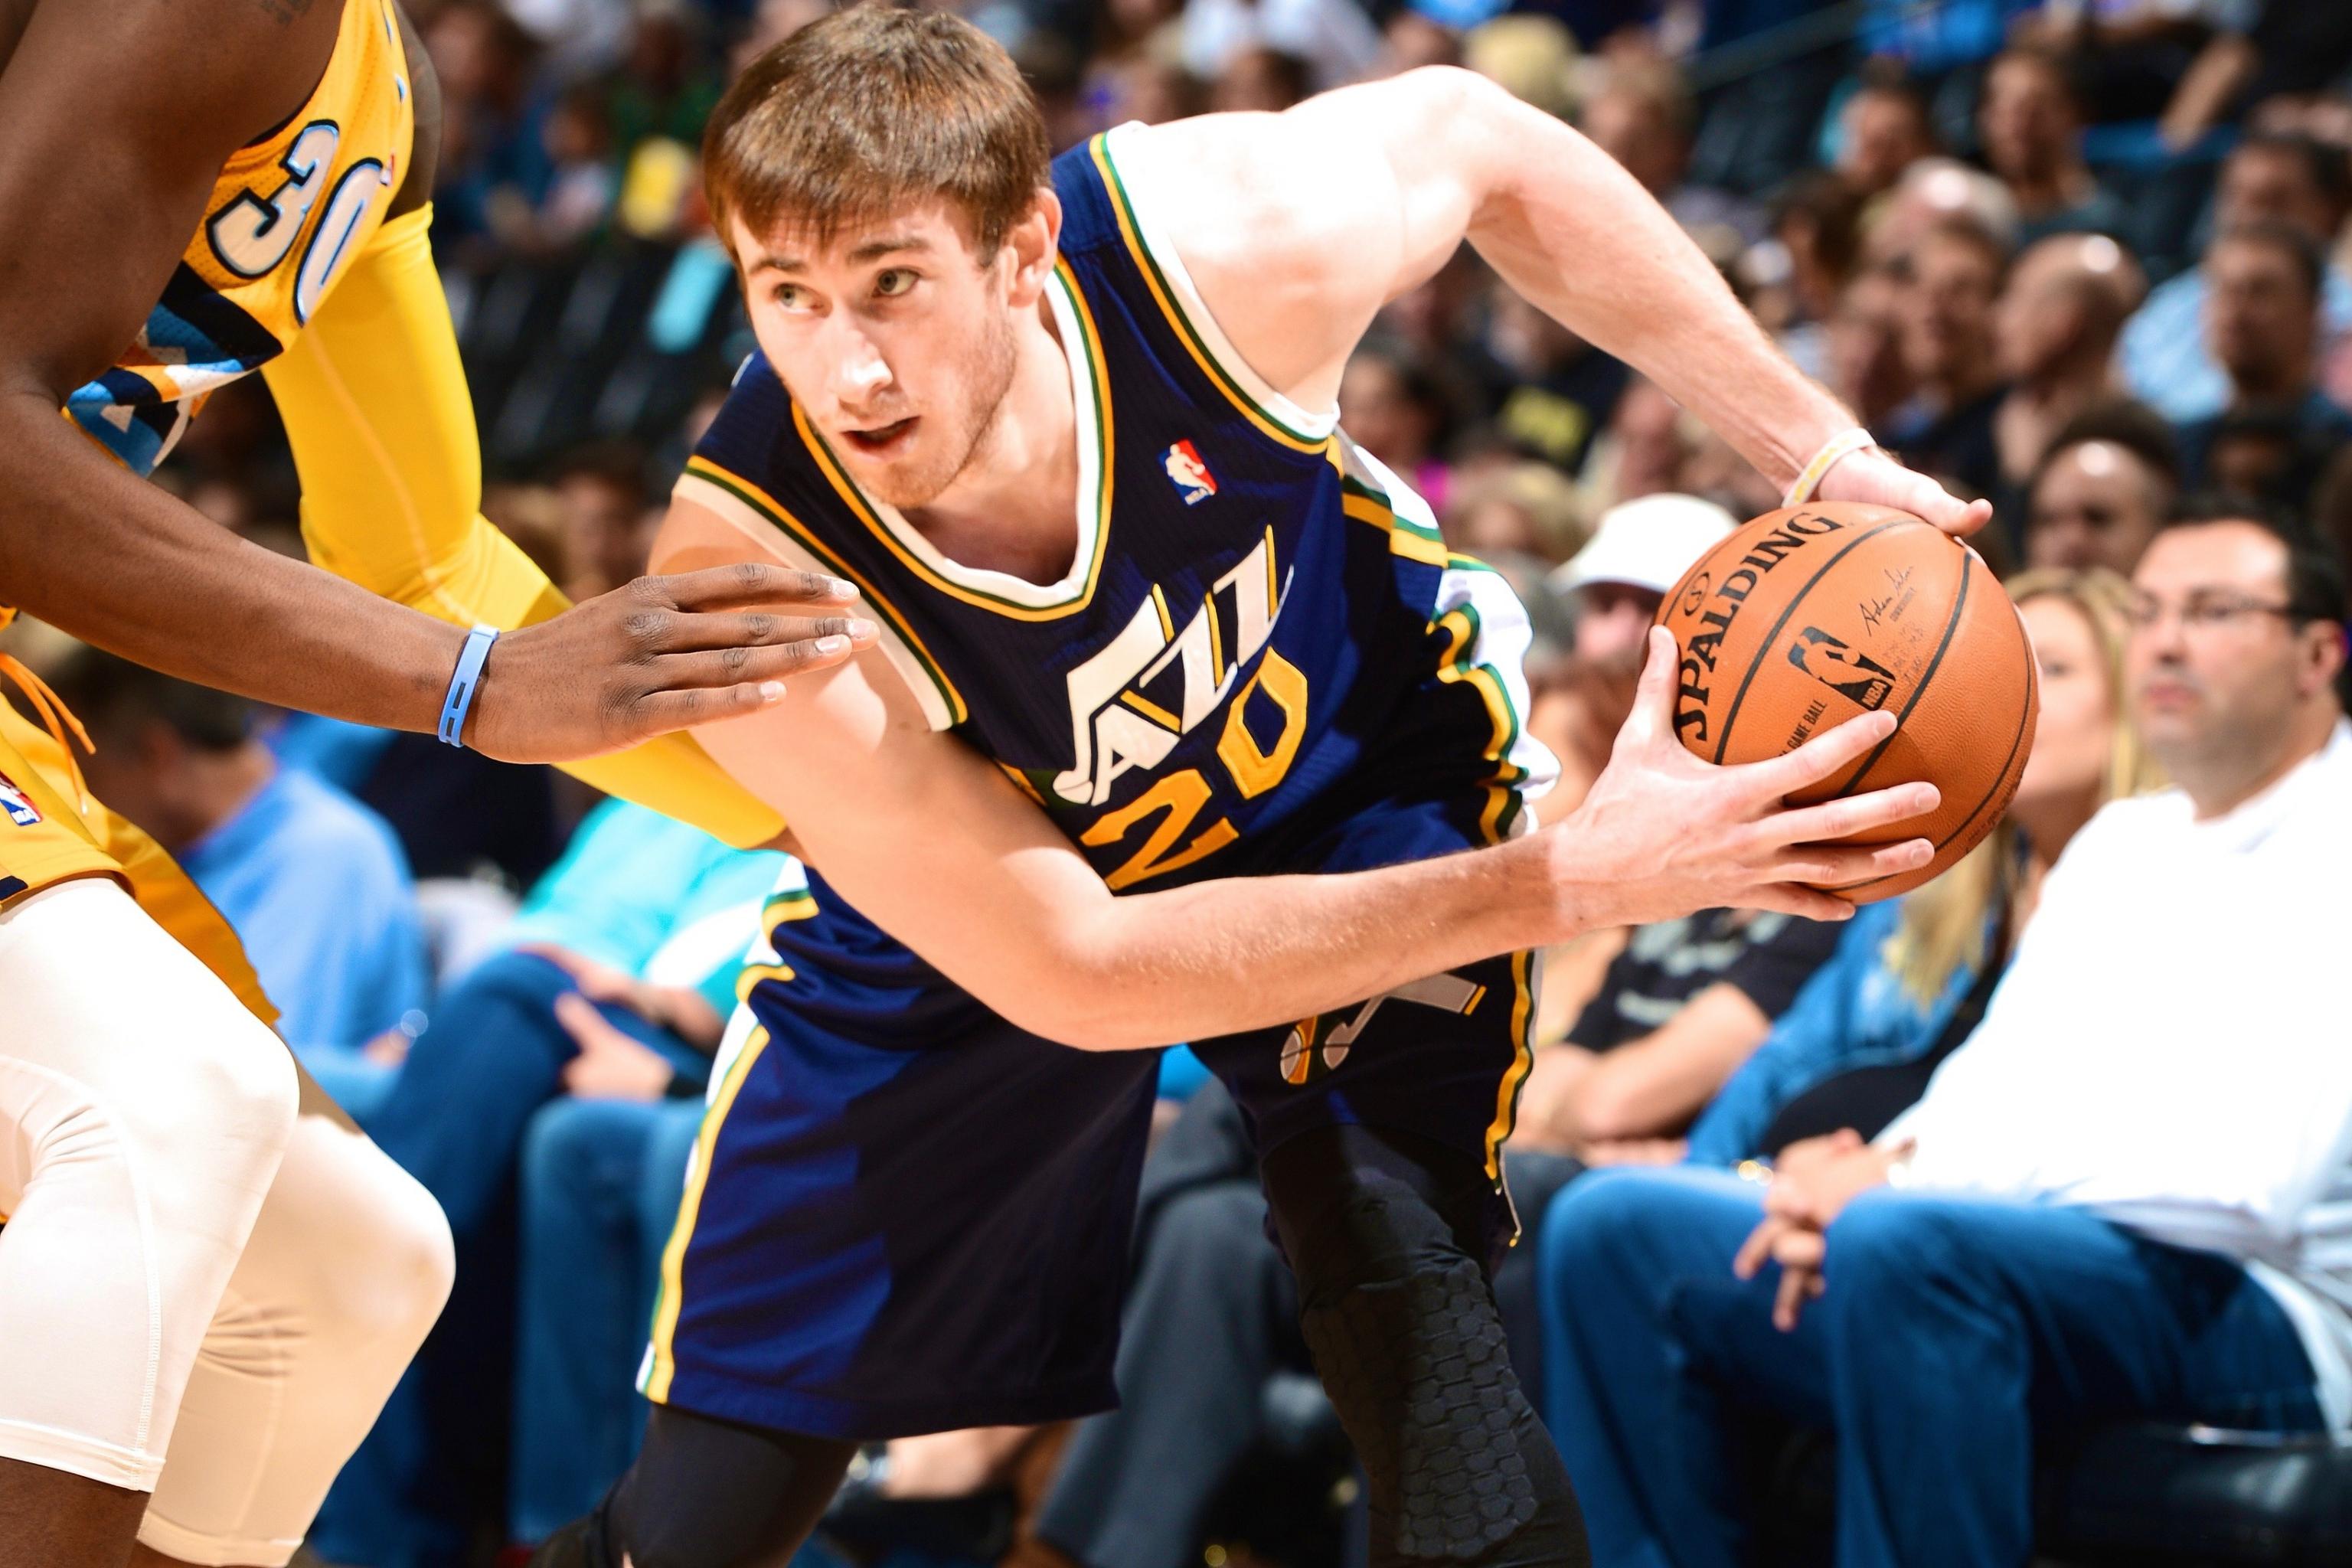 Problematic timing, but the Jazz are moving on from Gordon Hayward